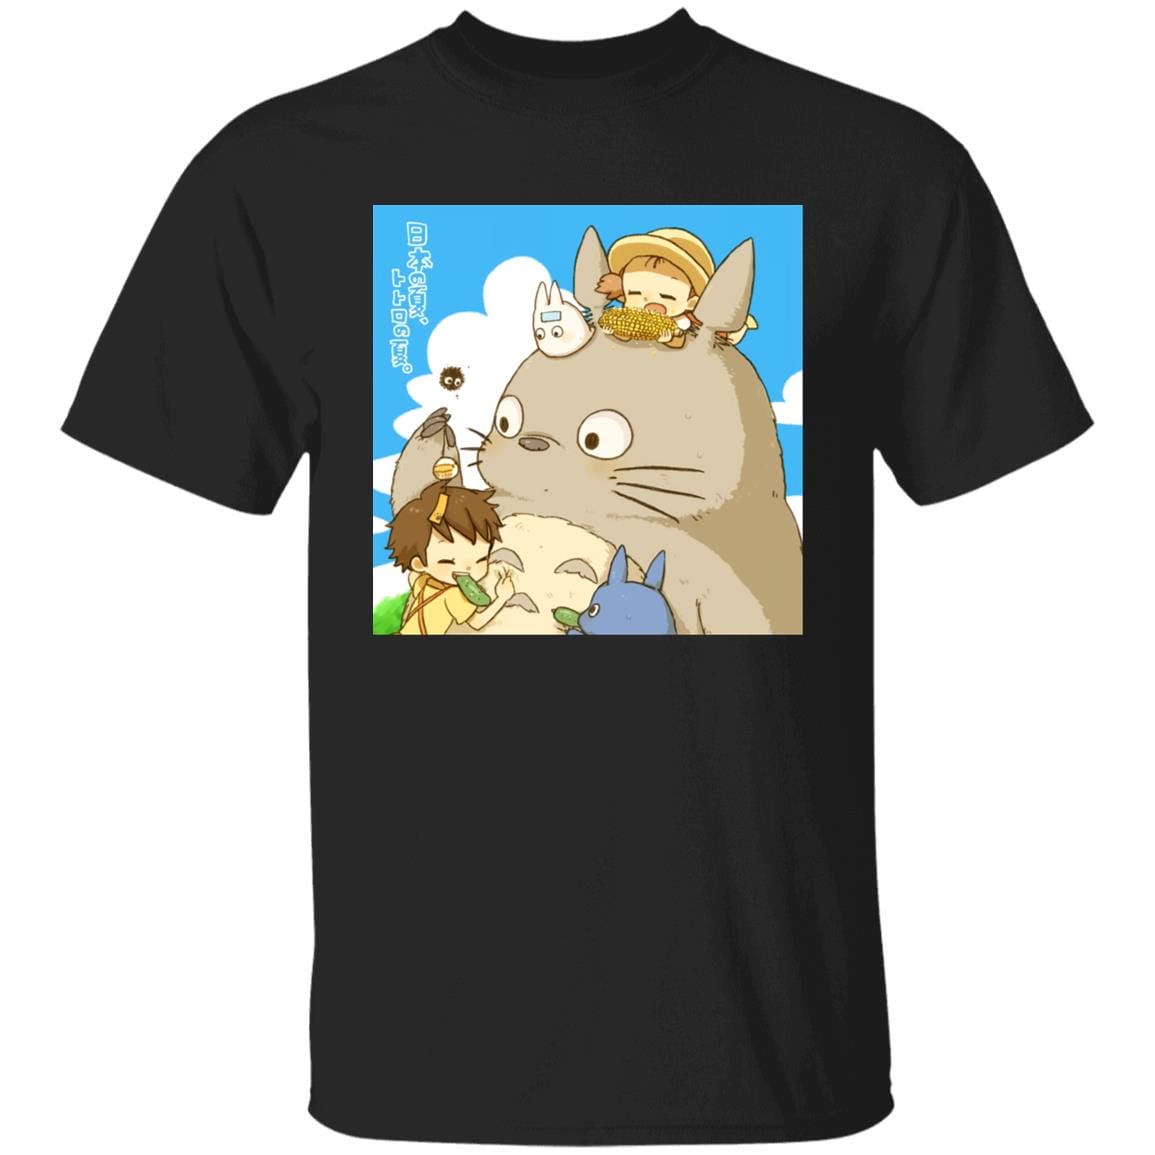 Totoro Family and Friends T Shirt